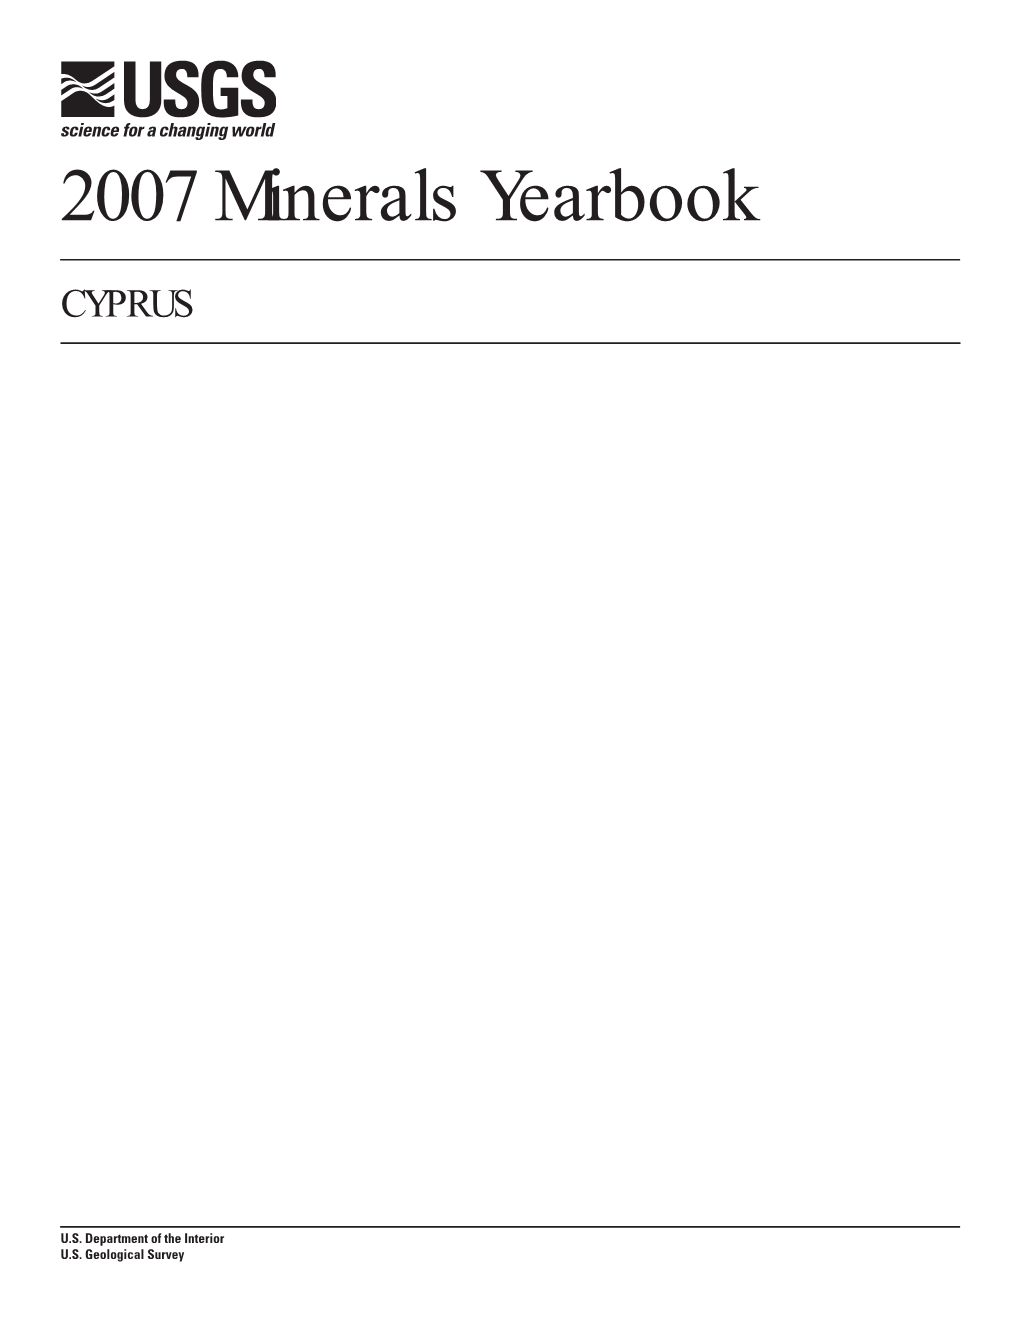 The Mineral Industry of Cyprus in 2007